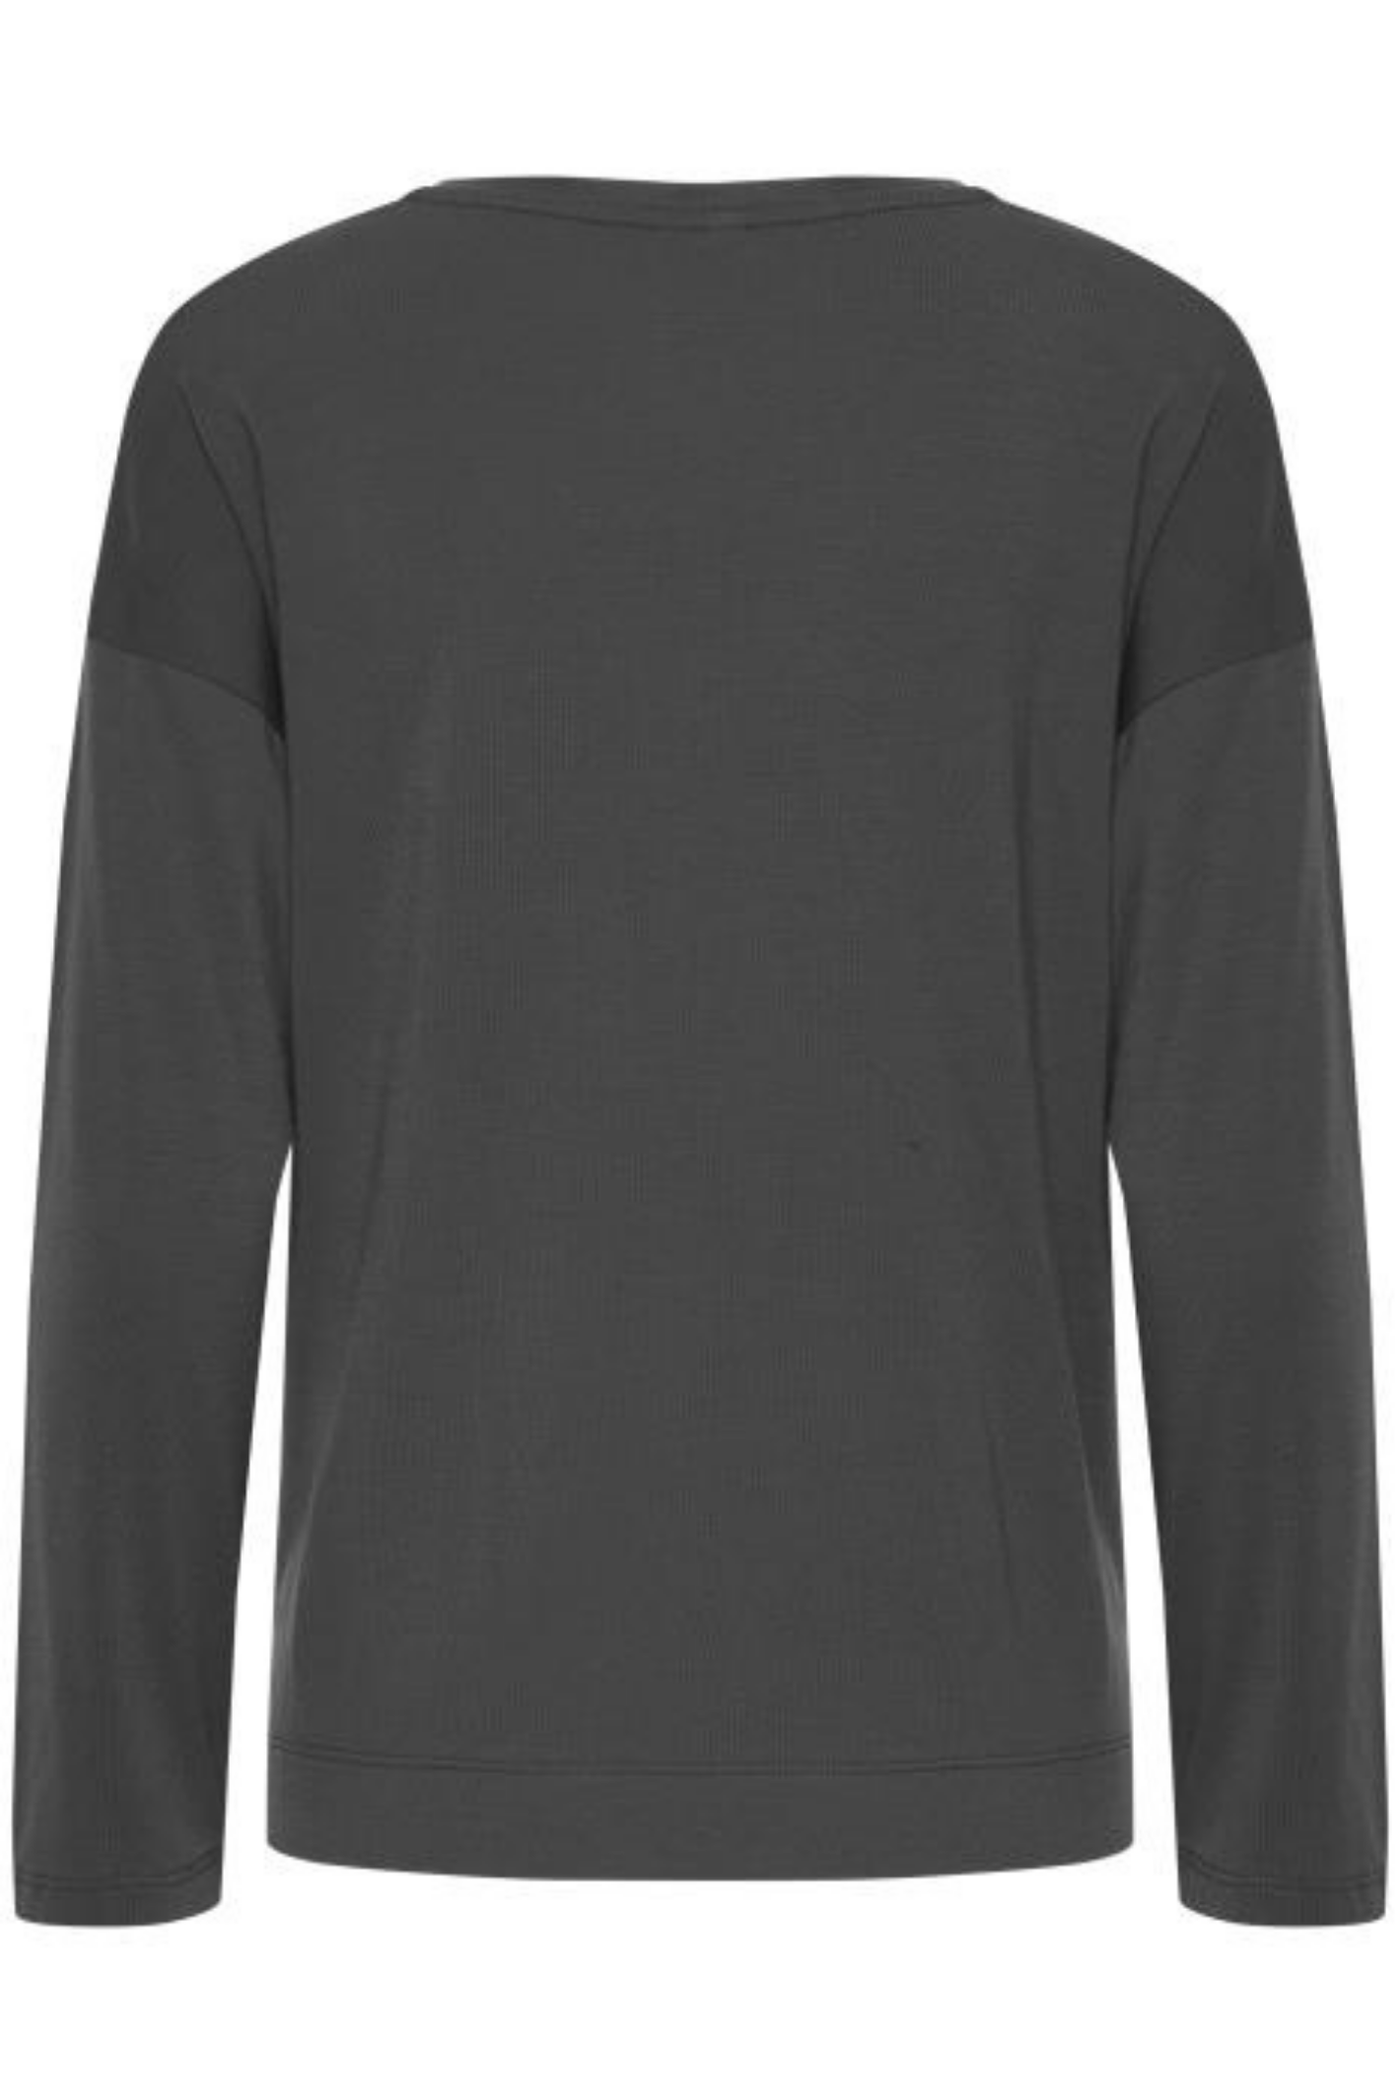 B Young Grey Rexima  Long Sleeved T-shirt - Jezabel Boutique